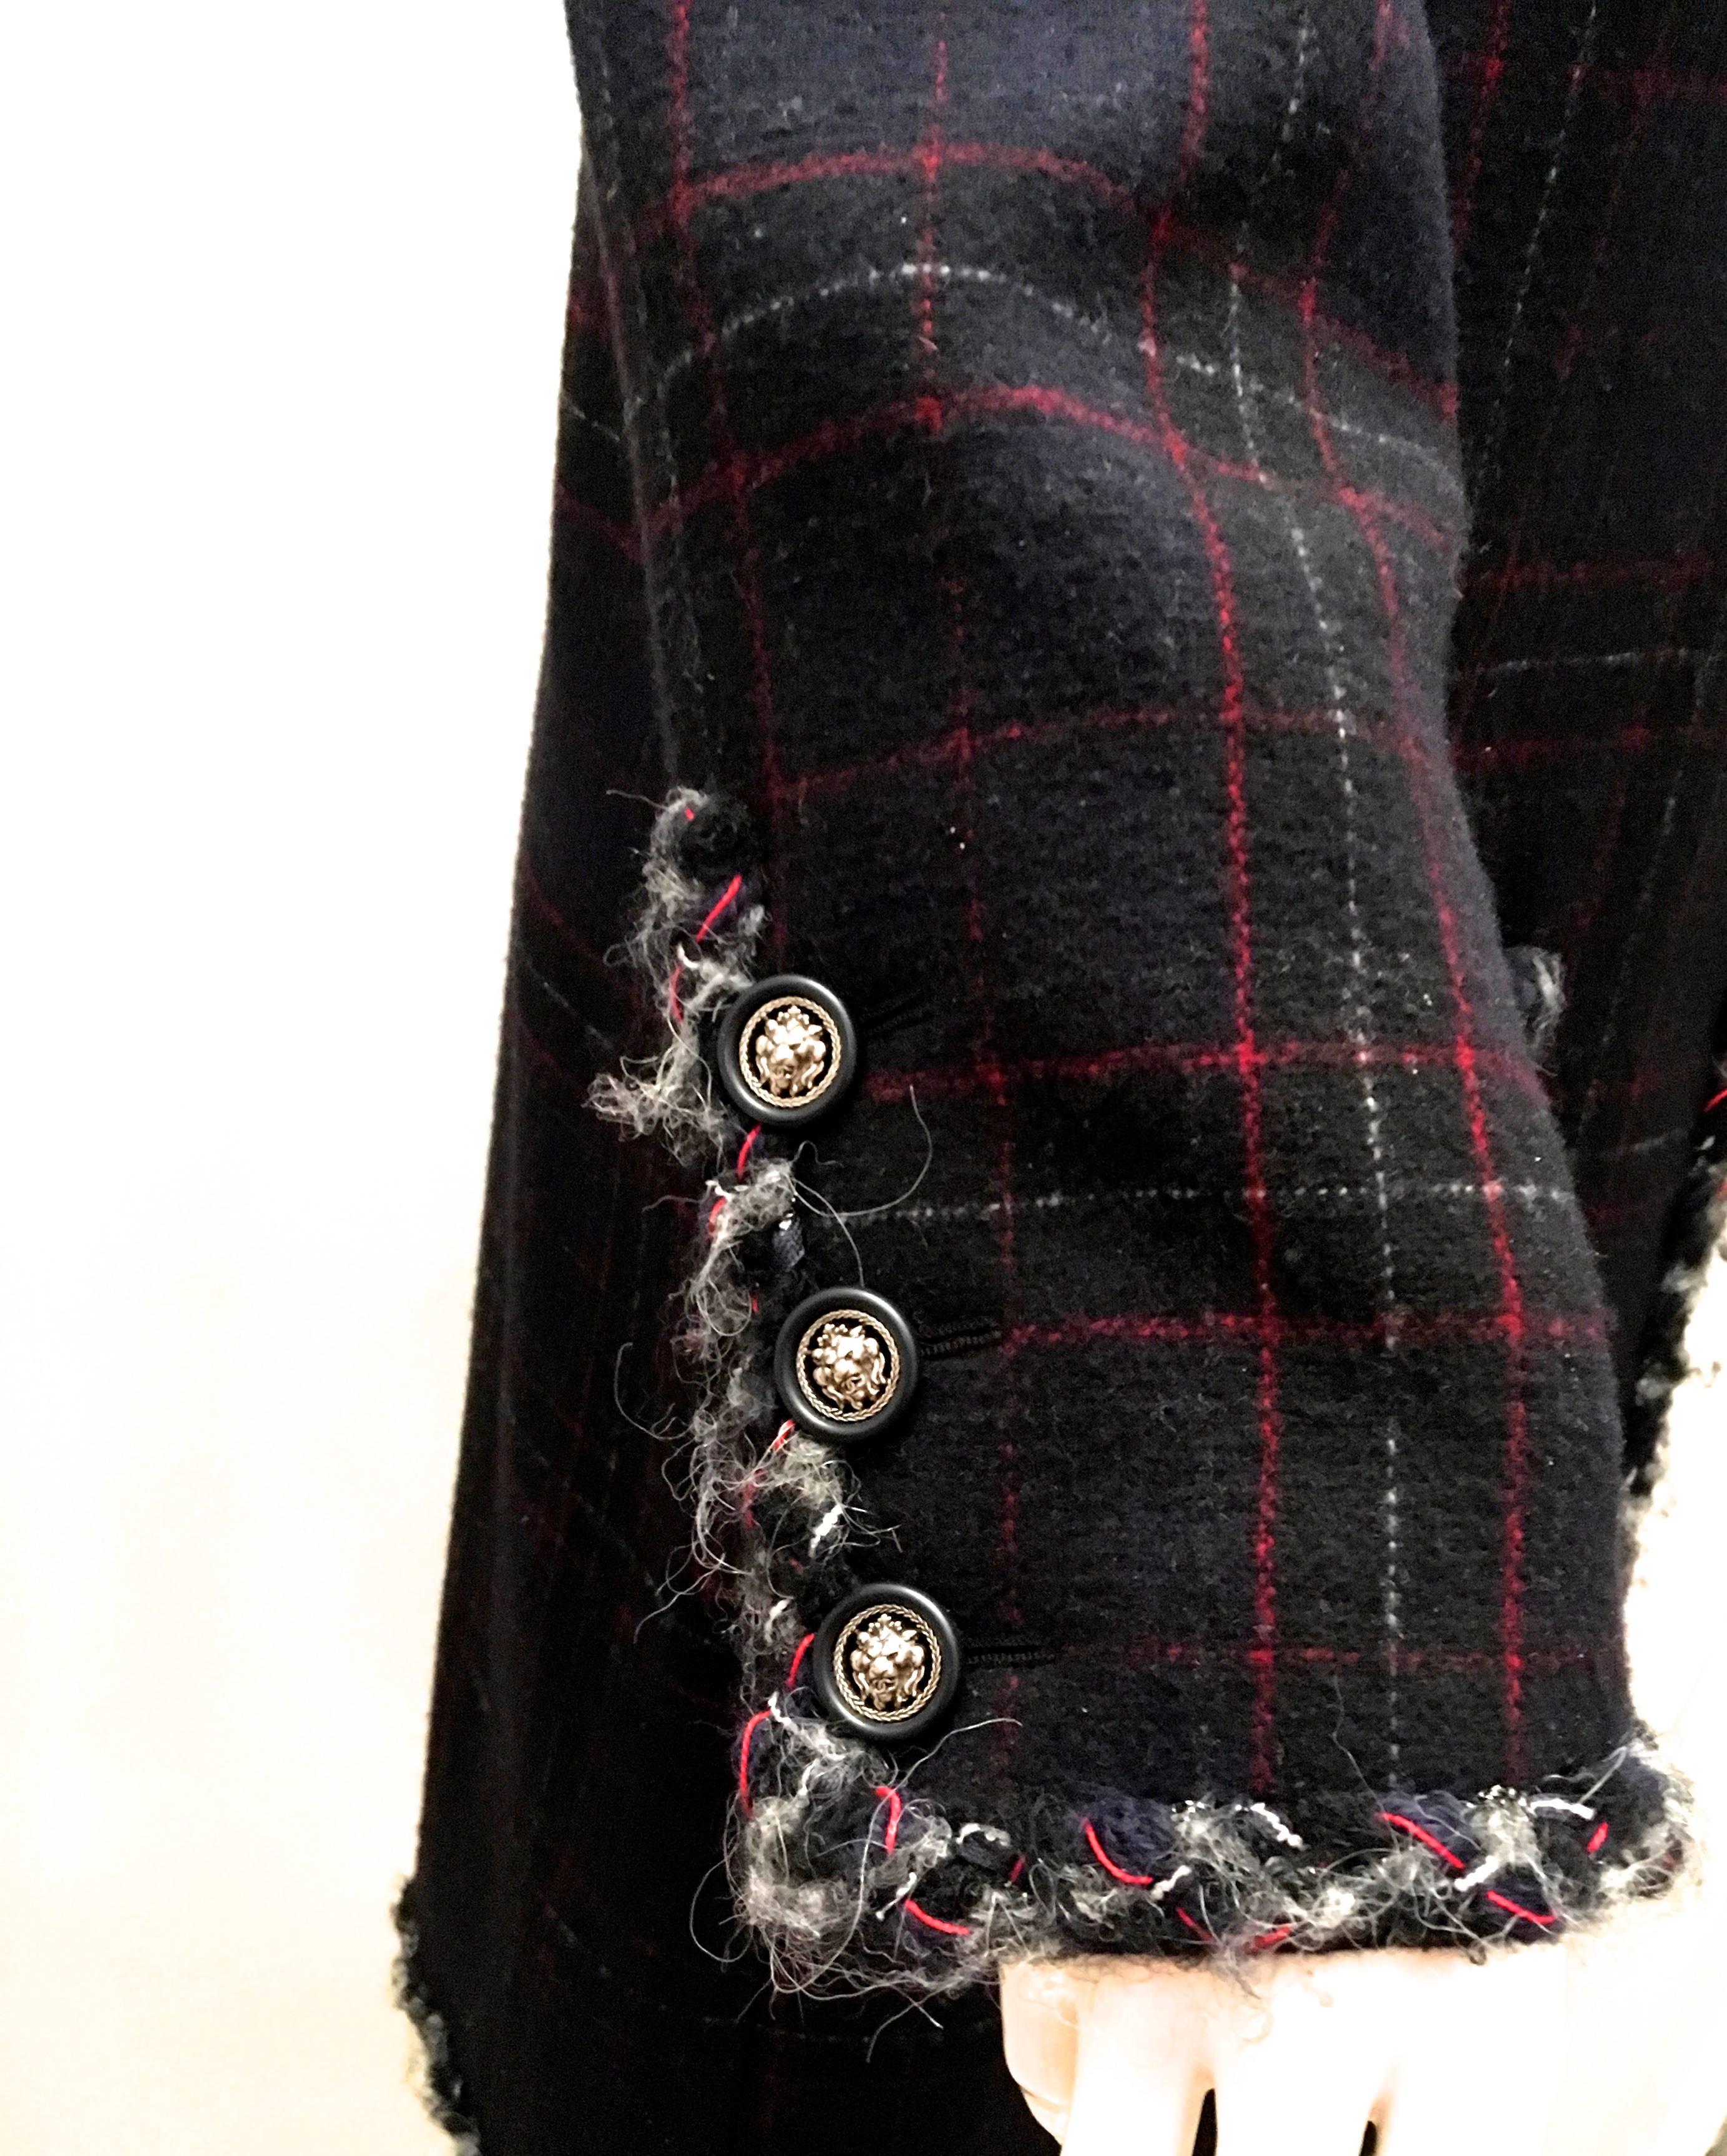 Black New Chanel Coat - Boucle - Navy Blue w/ Red and White Accents - Wow! For Sale